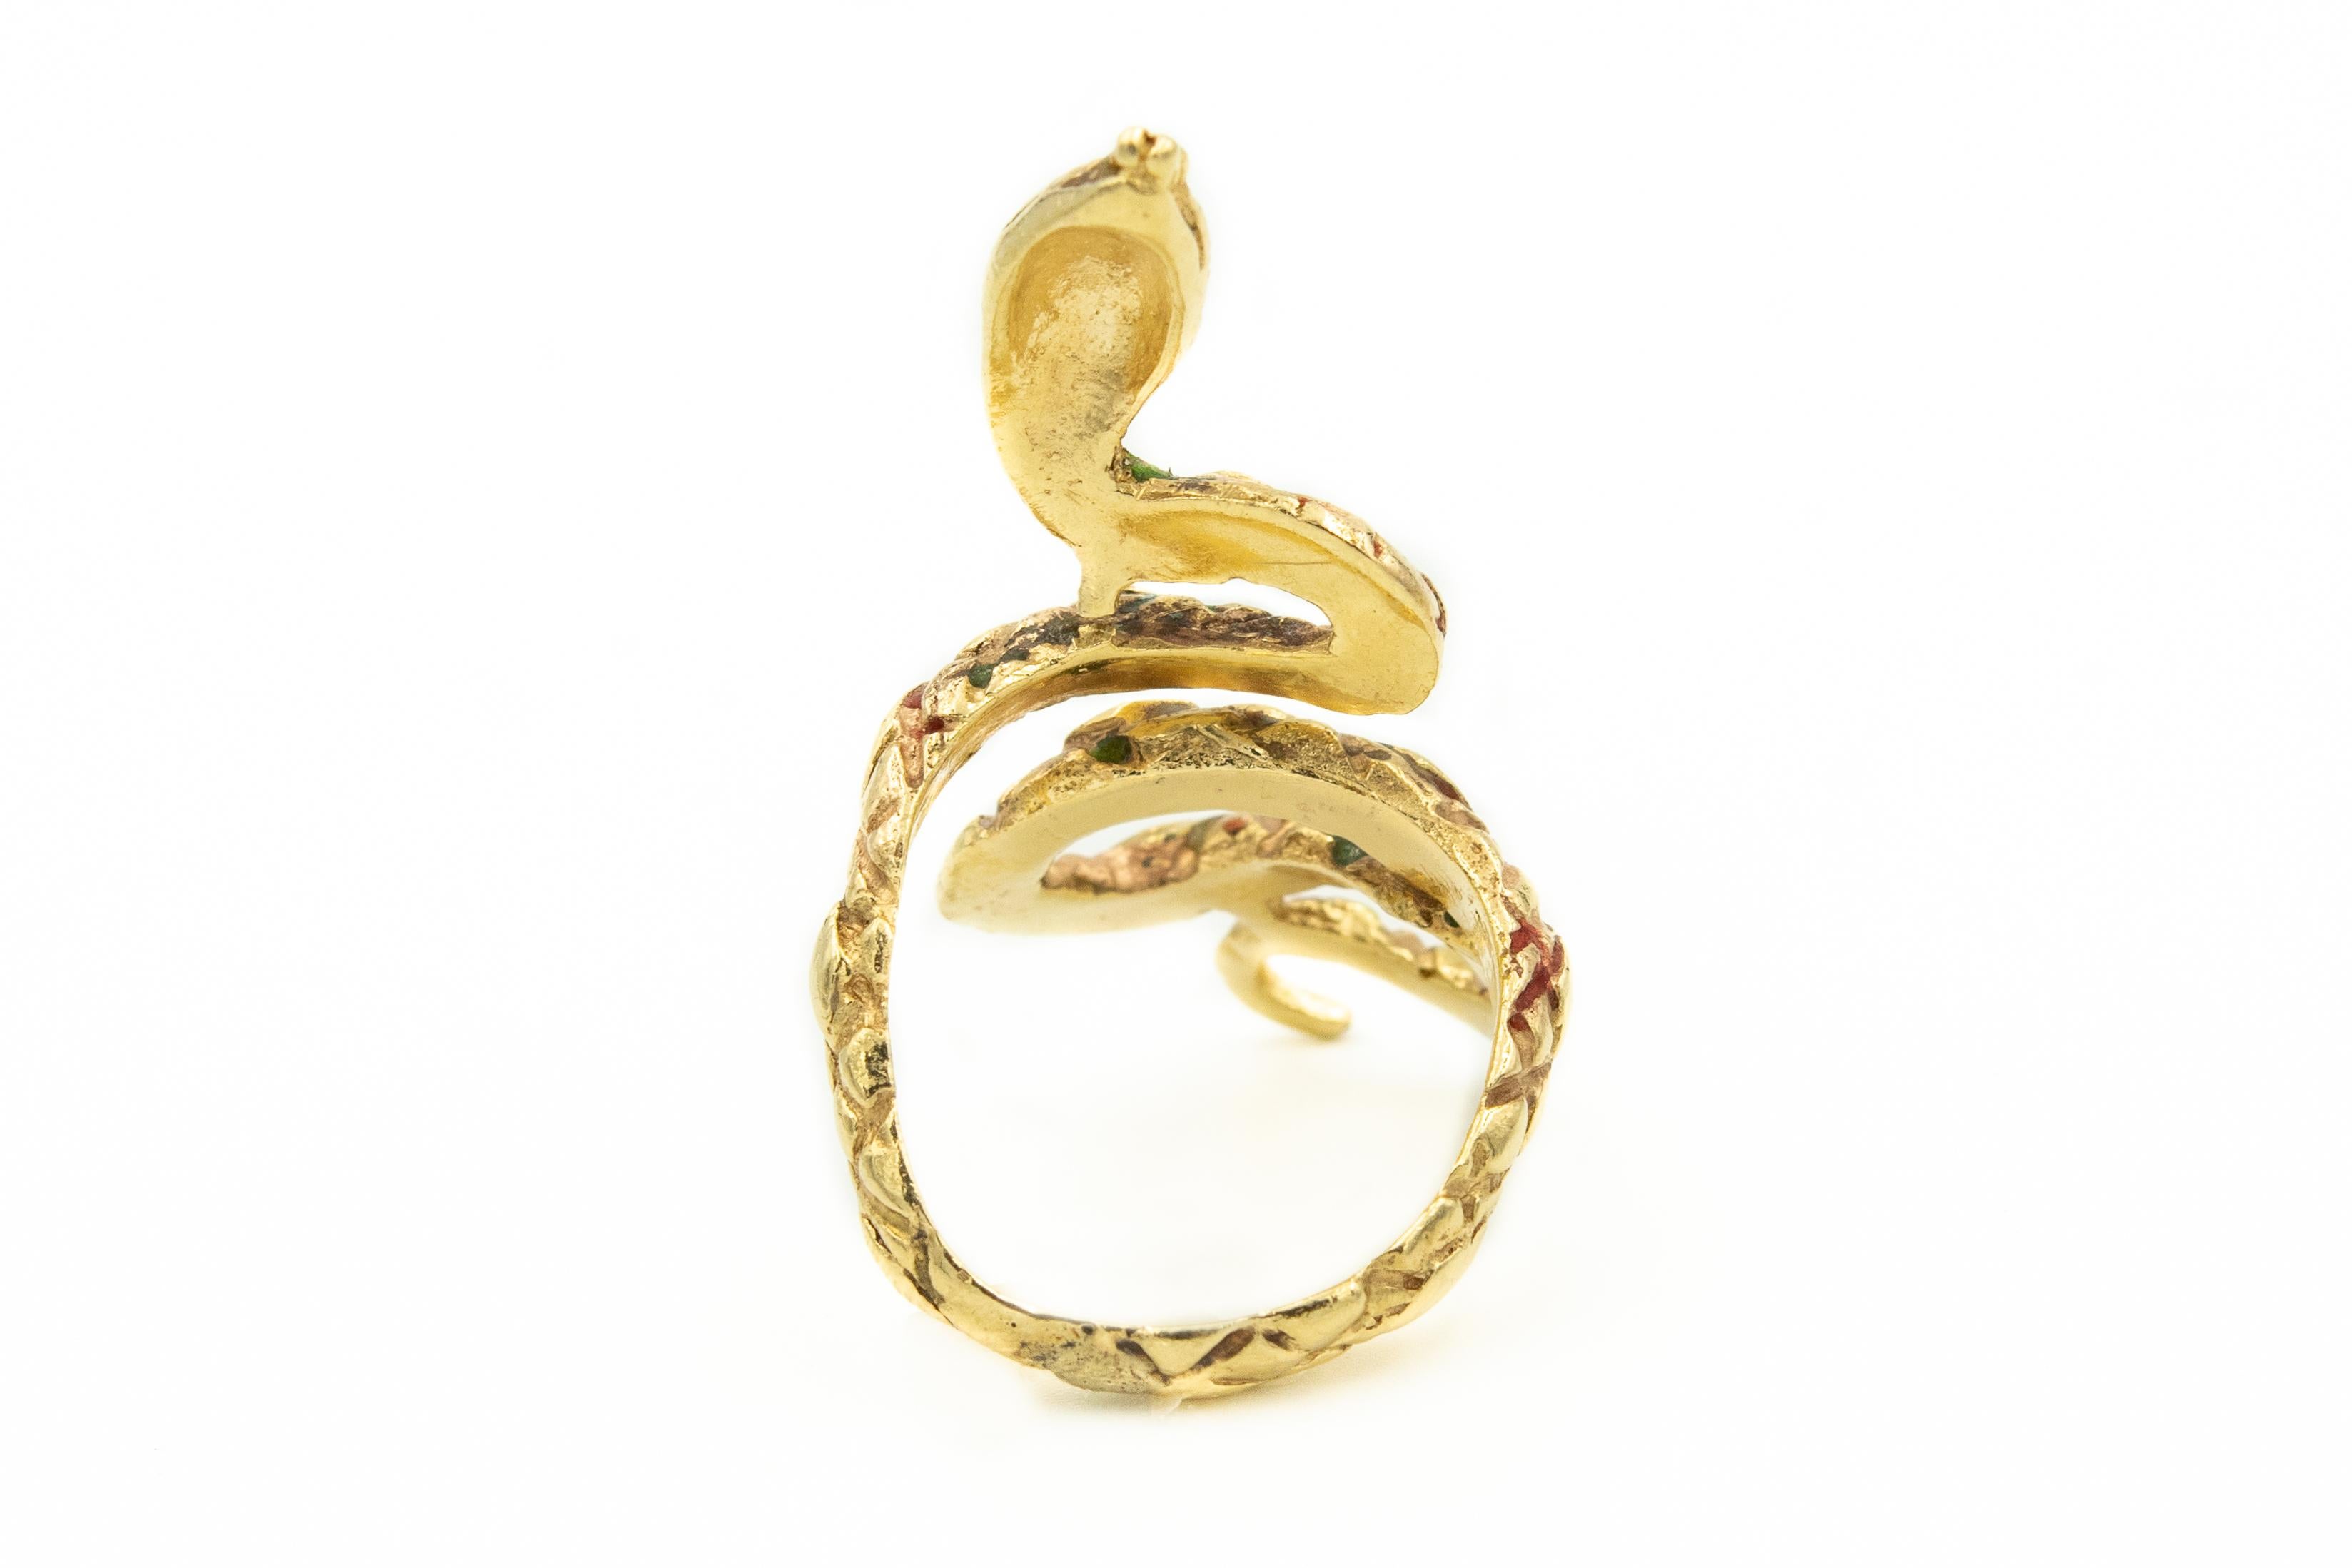 gold snake ring with emerald eyes